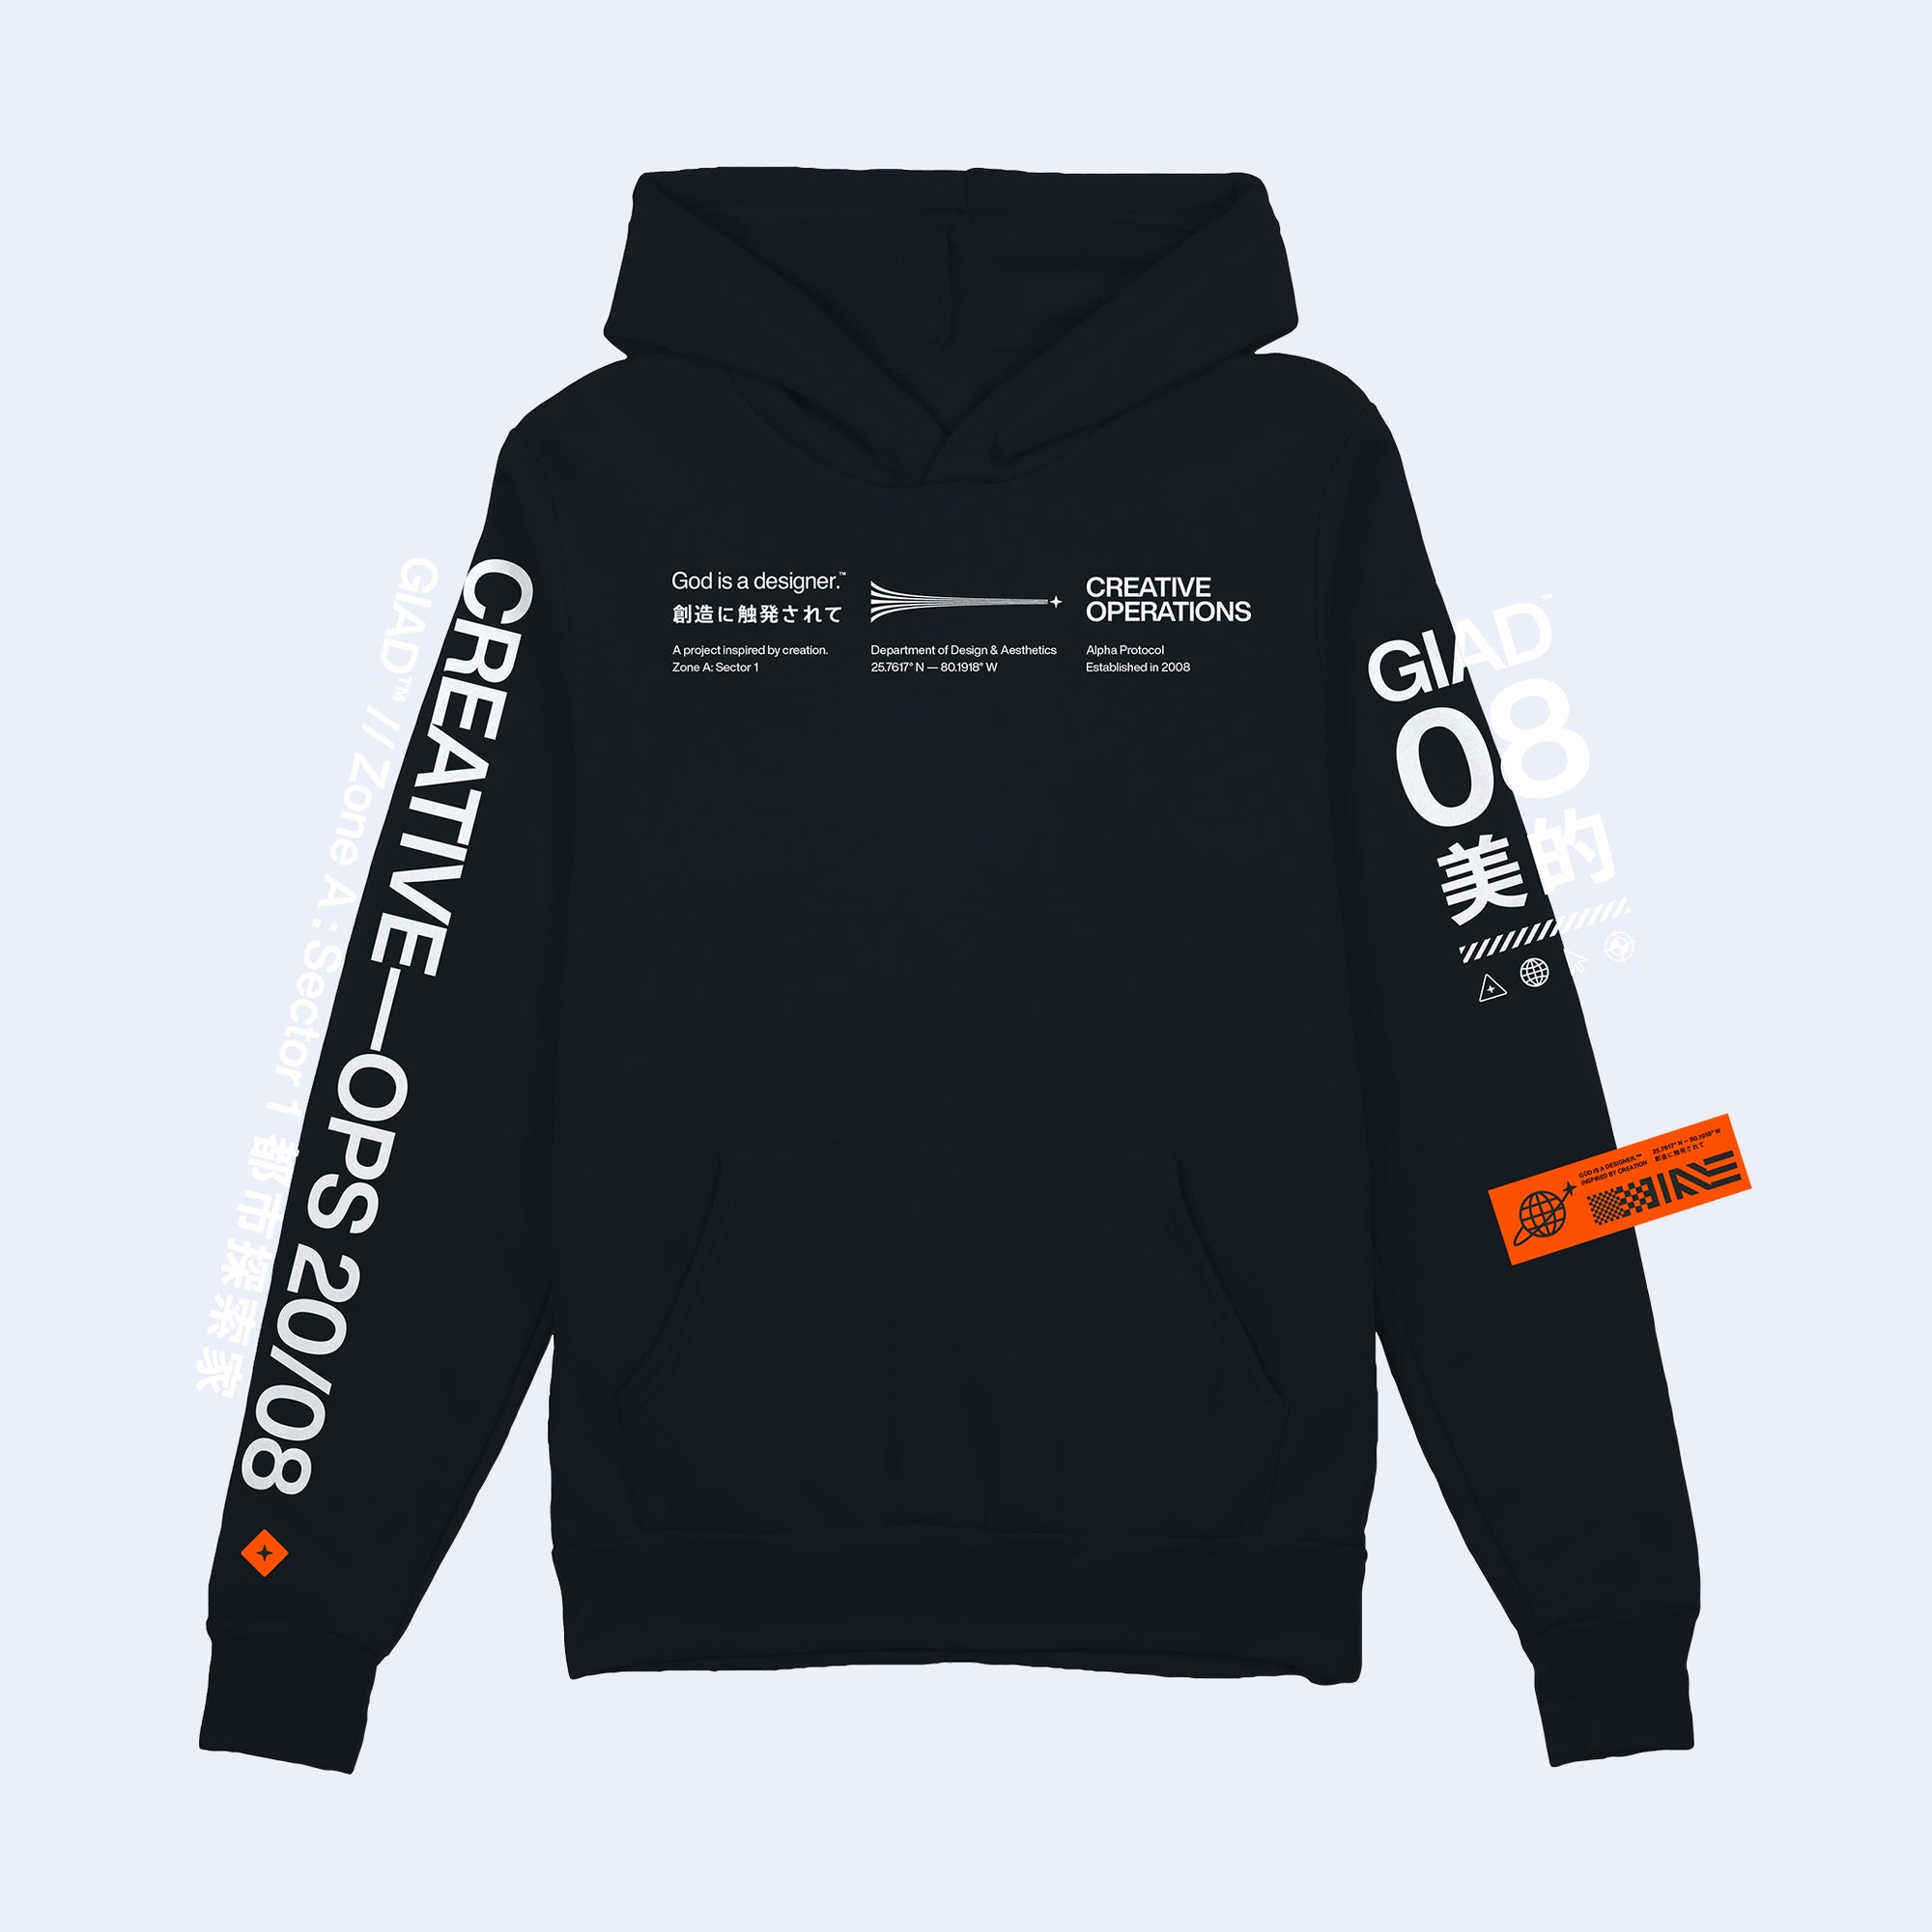 GIAD™ Creative Operations Hooded Pullover [Black] - God is a designer.®